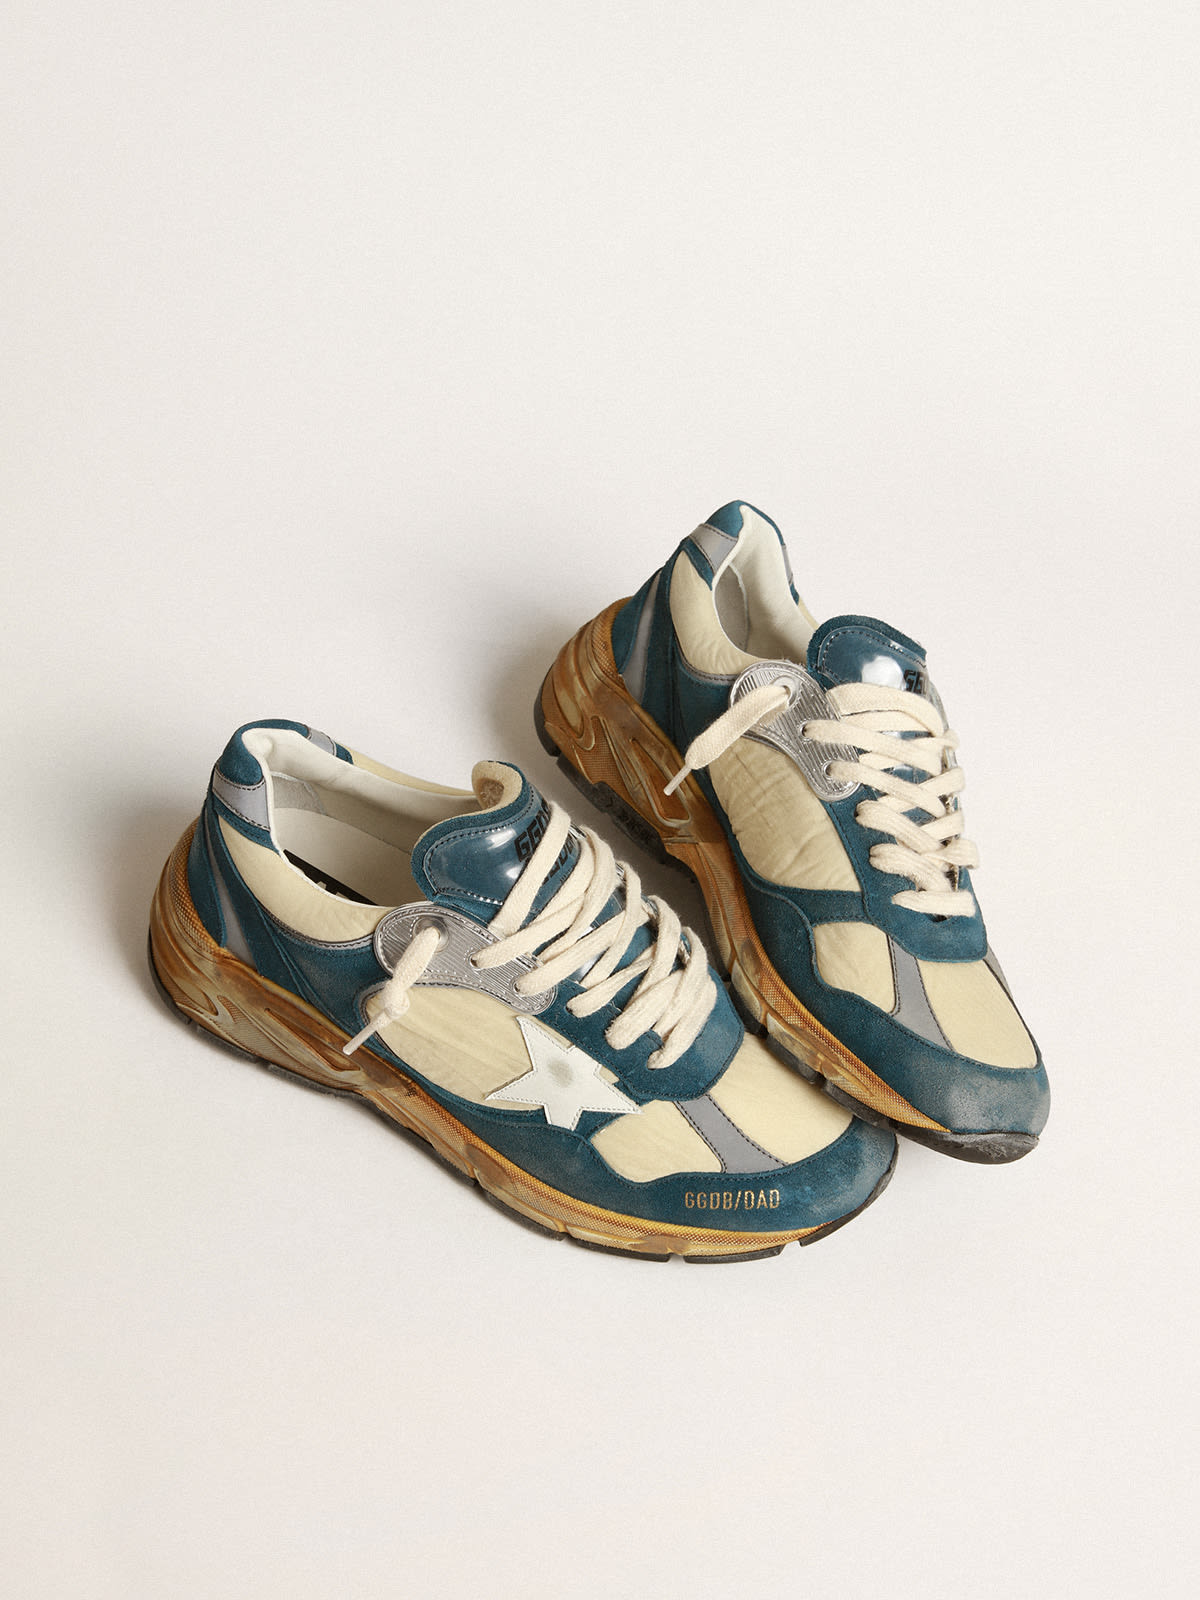 Golden Goose - Women’s Dad-Star in petrol-blue suede with white leather star in 